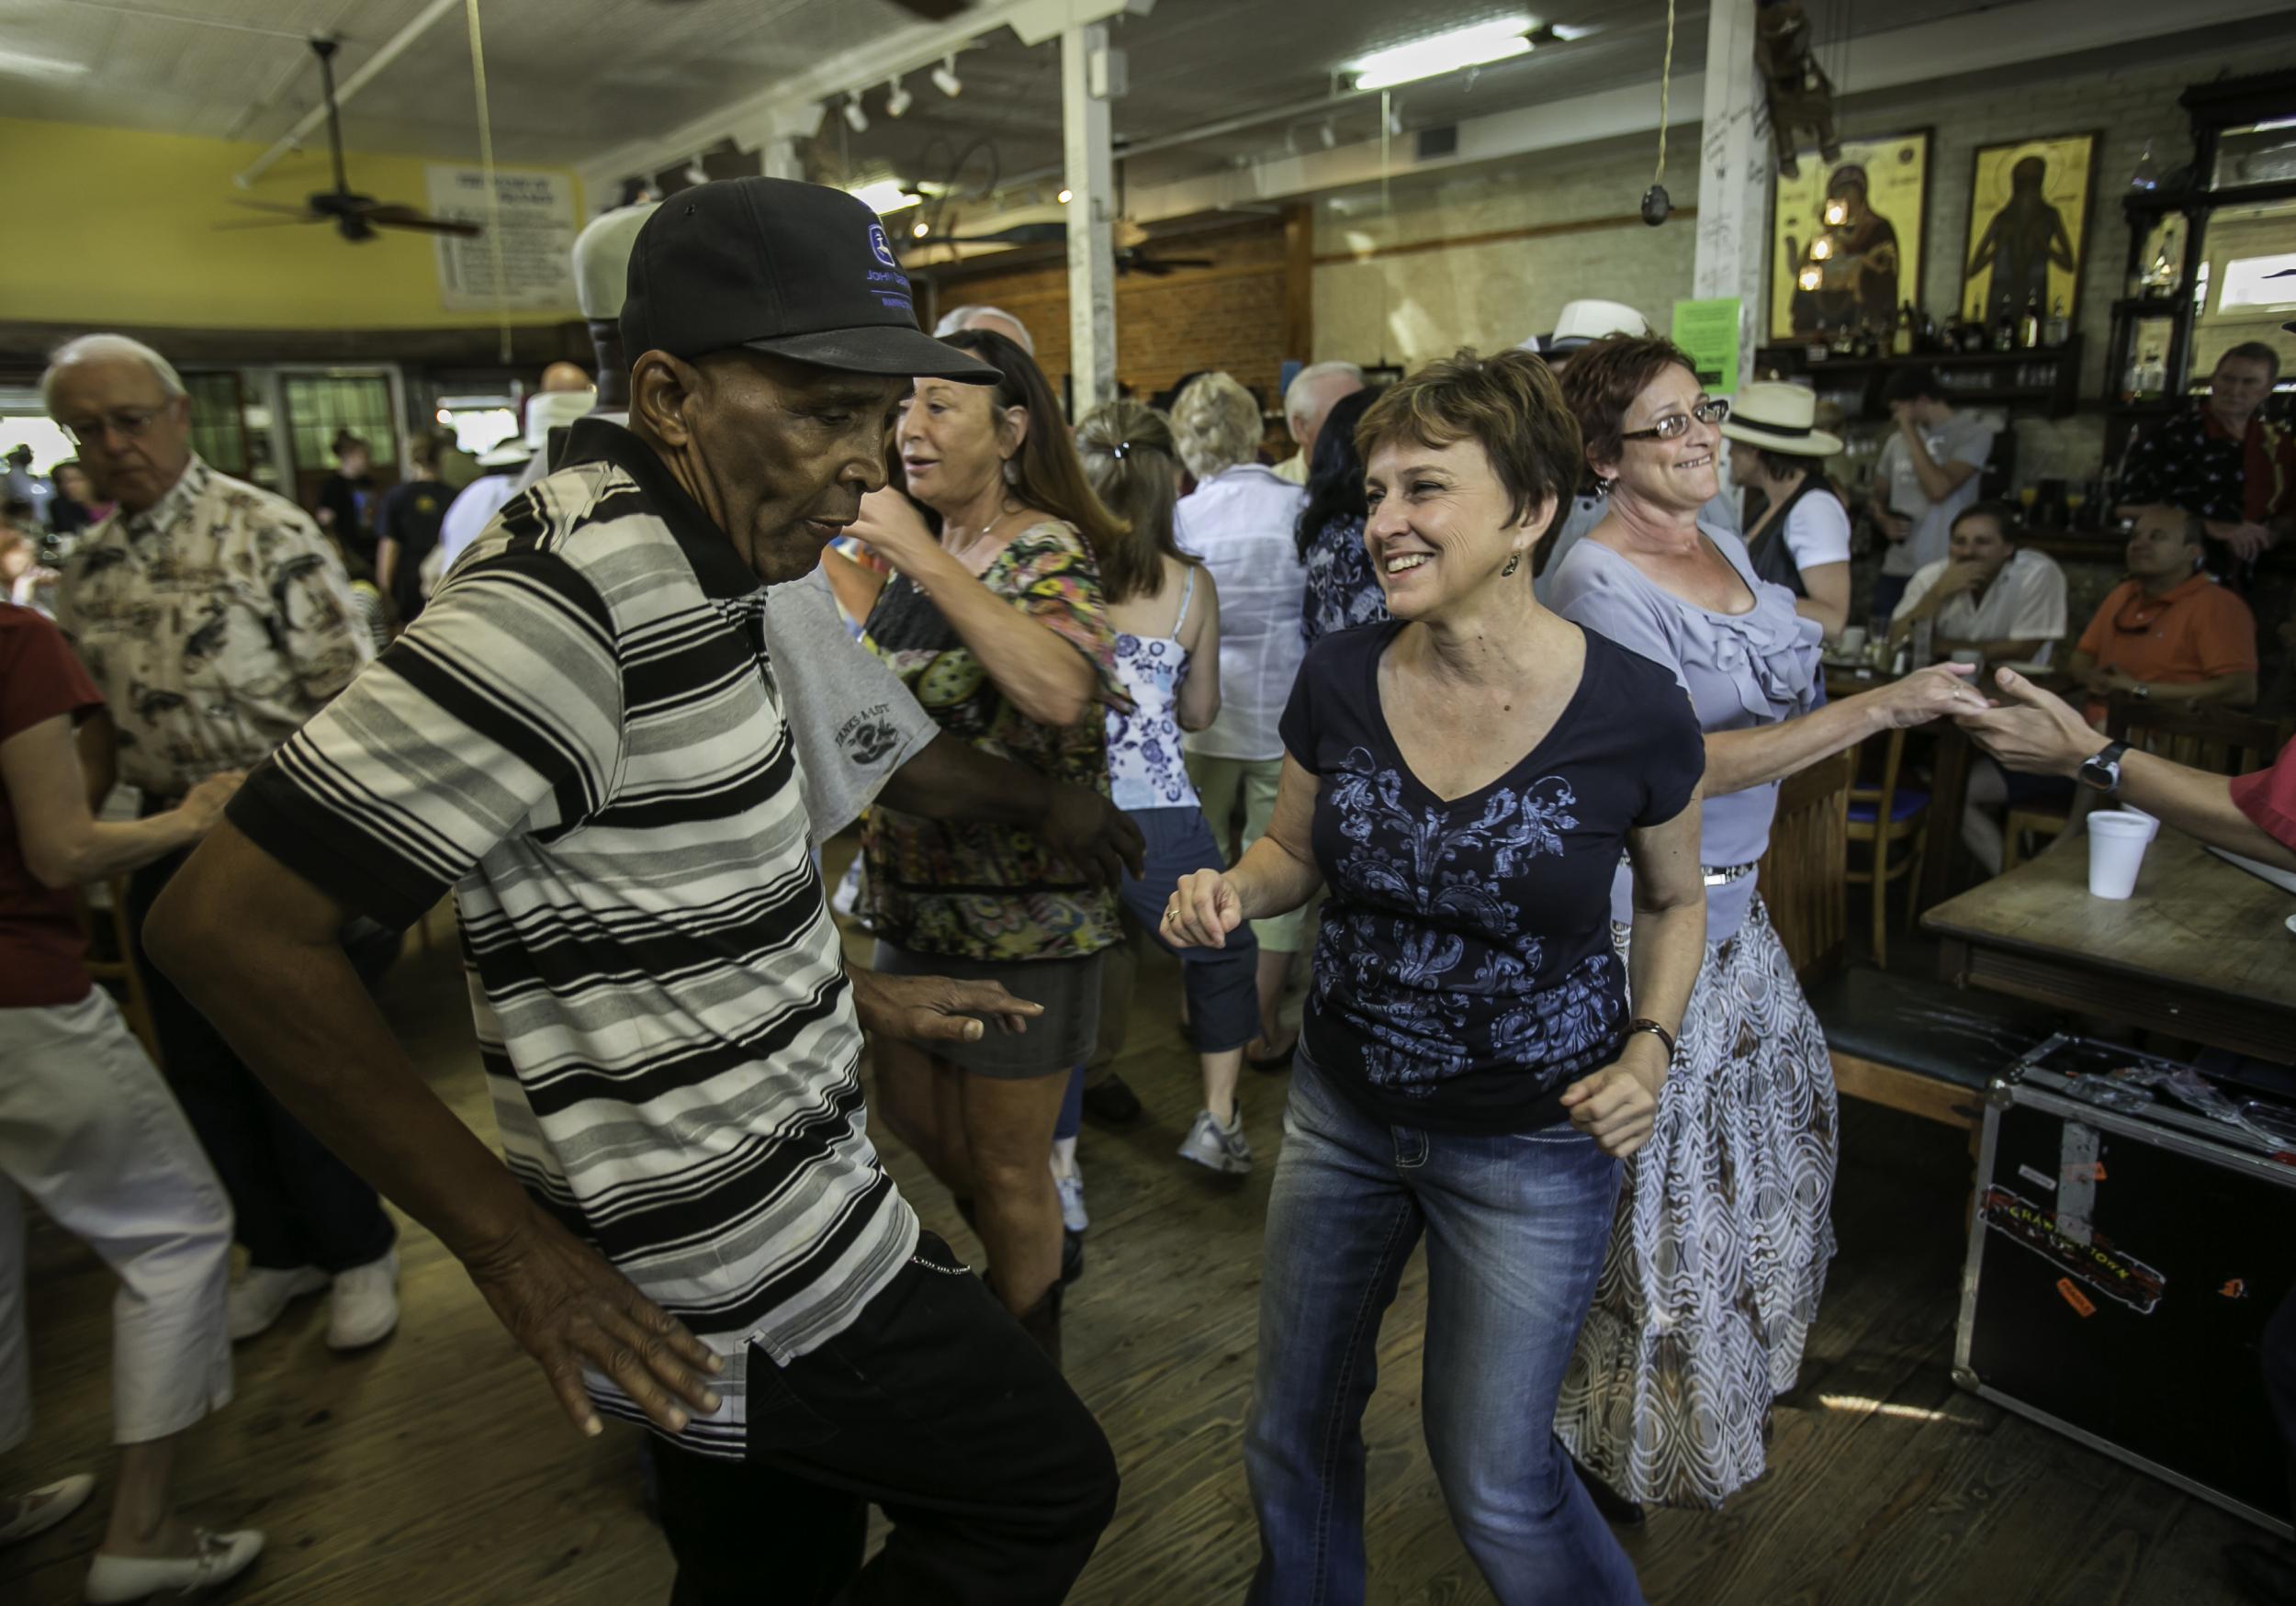 The weekend starts early in Cajun Country, with dancing from 8am at the Cafe des Amis